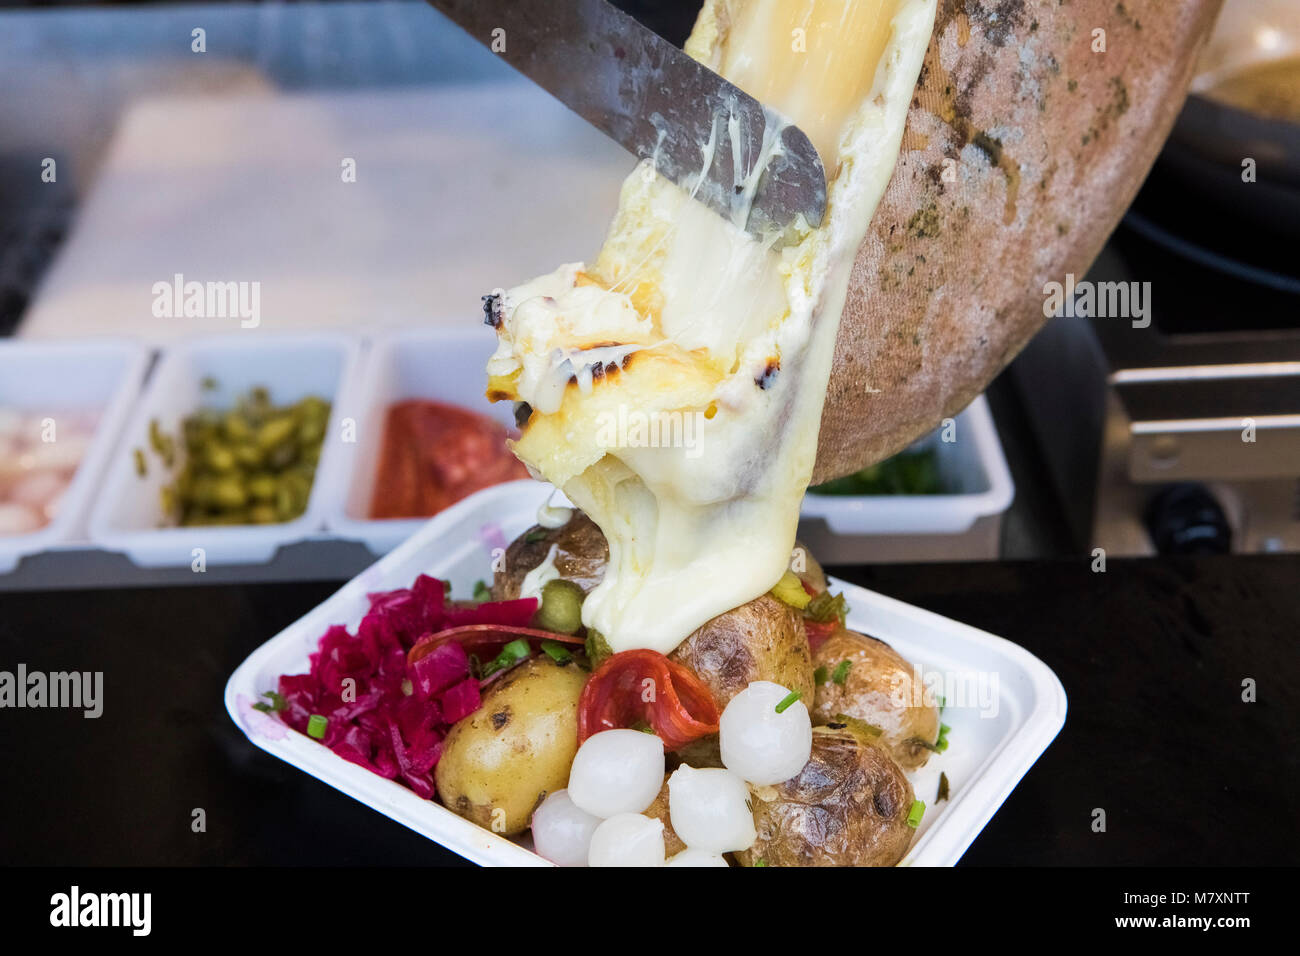 Raclette cheese on new potatoes with pickles. Stock Photo